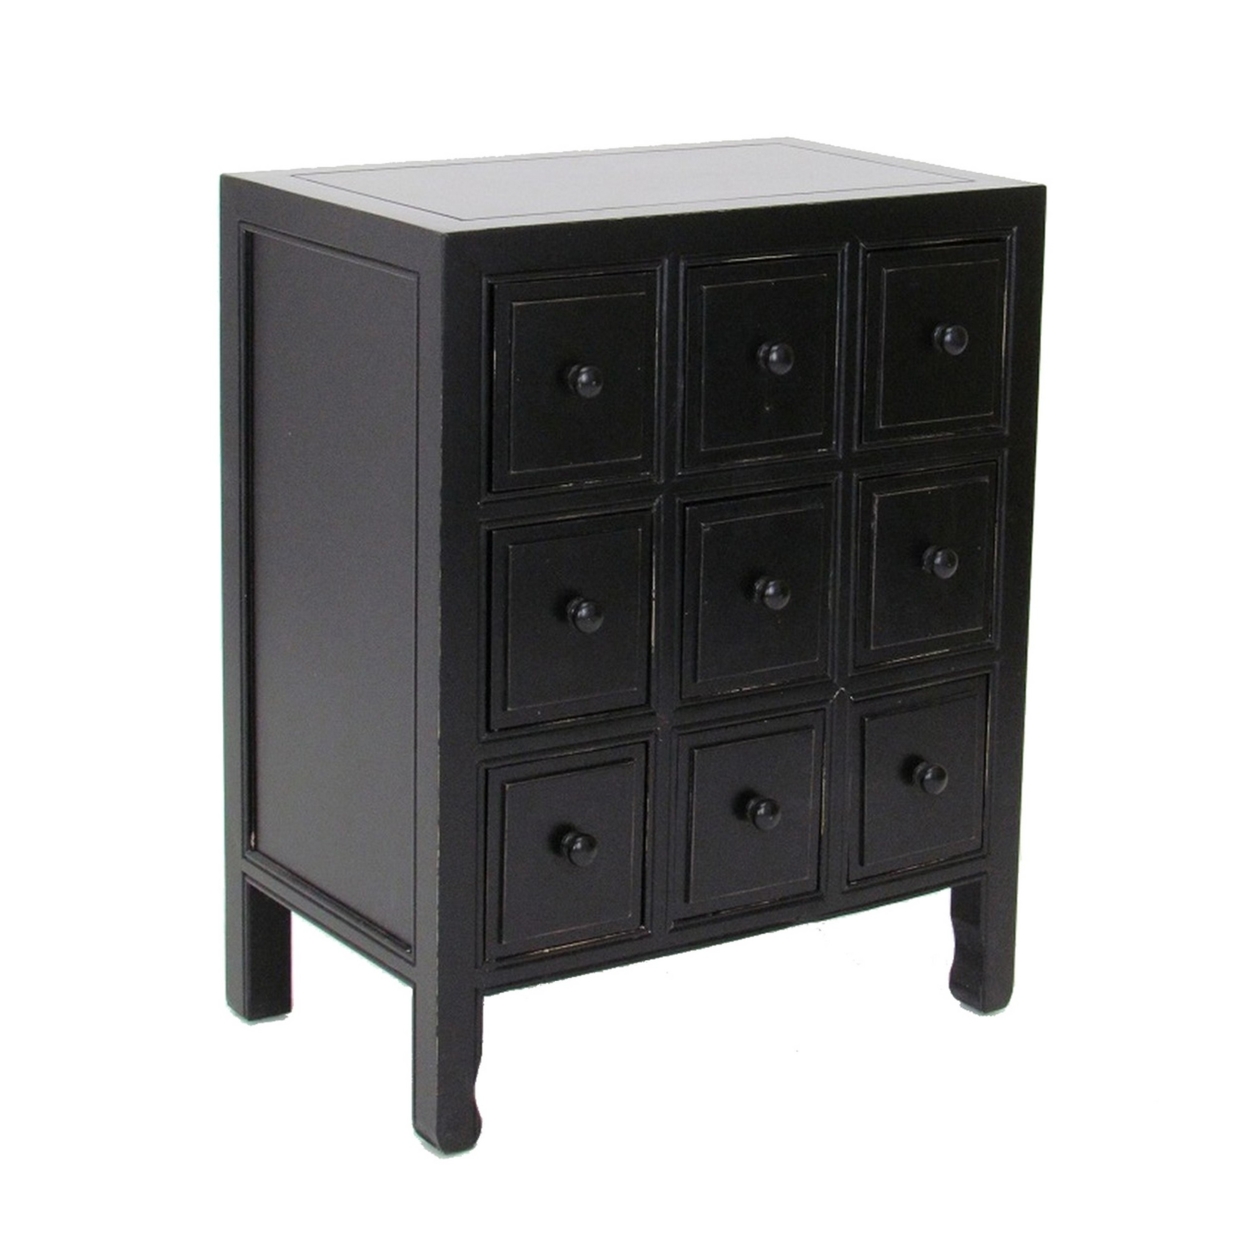 CD Chest With 9 Small Drawers And Round Knobs, Antique Black- Saltoro Sherpi